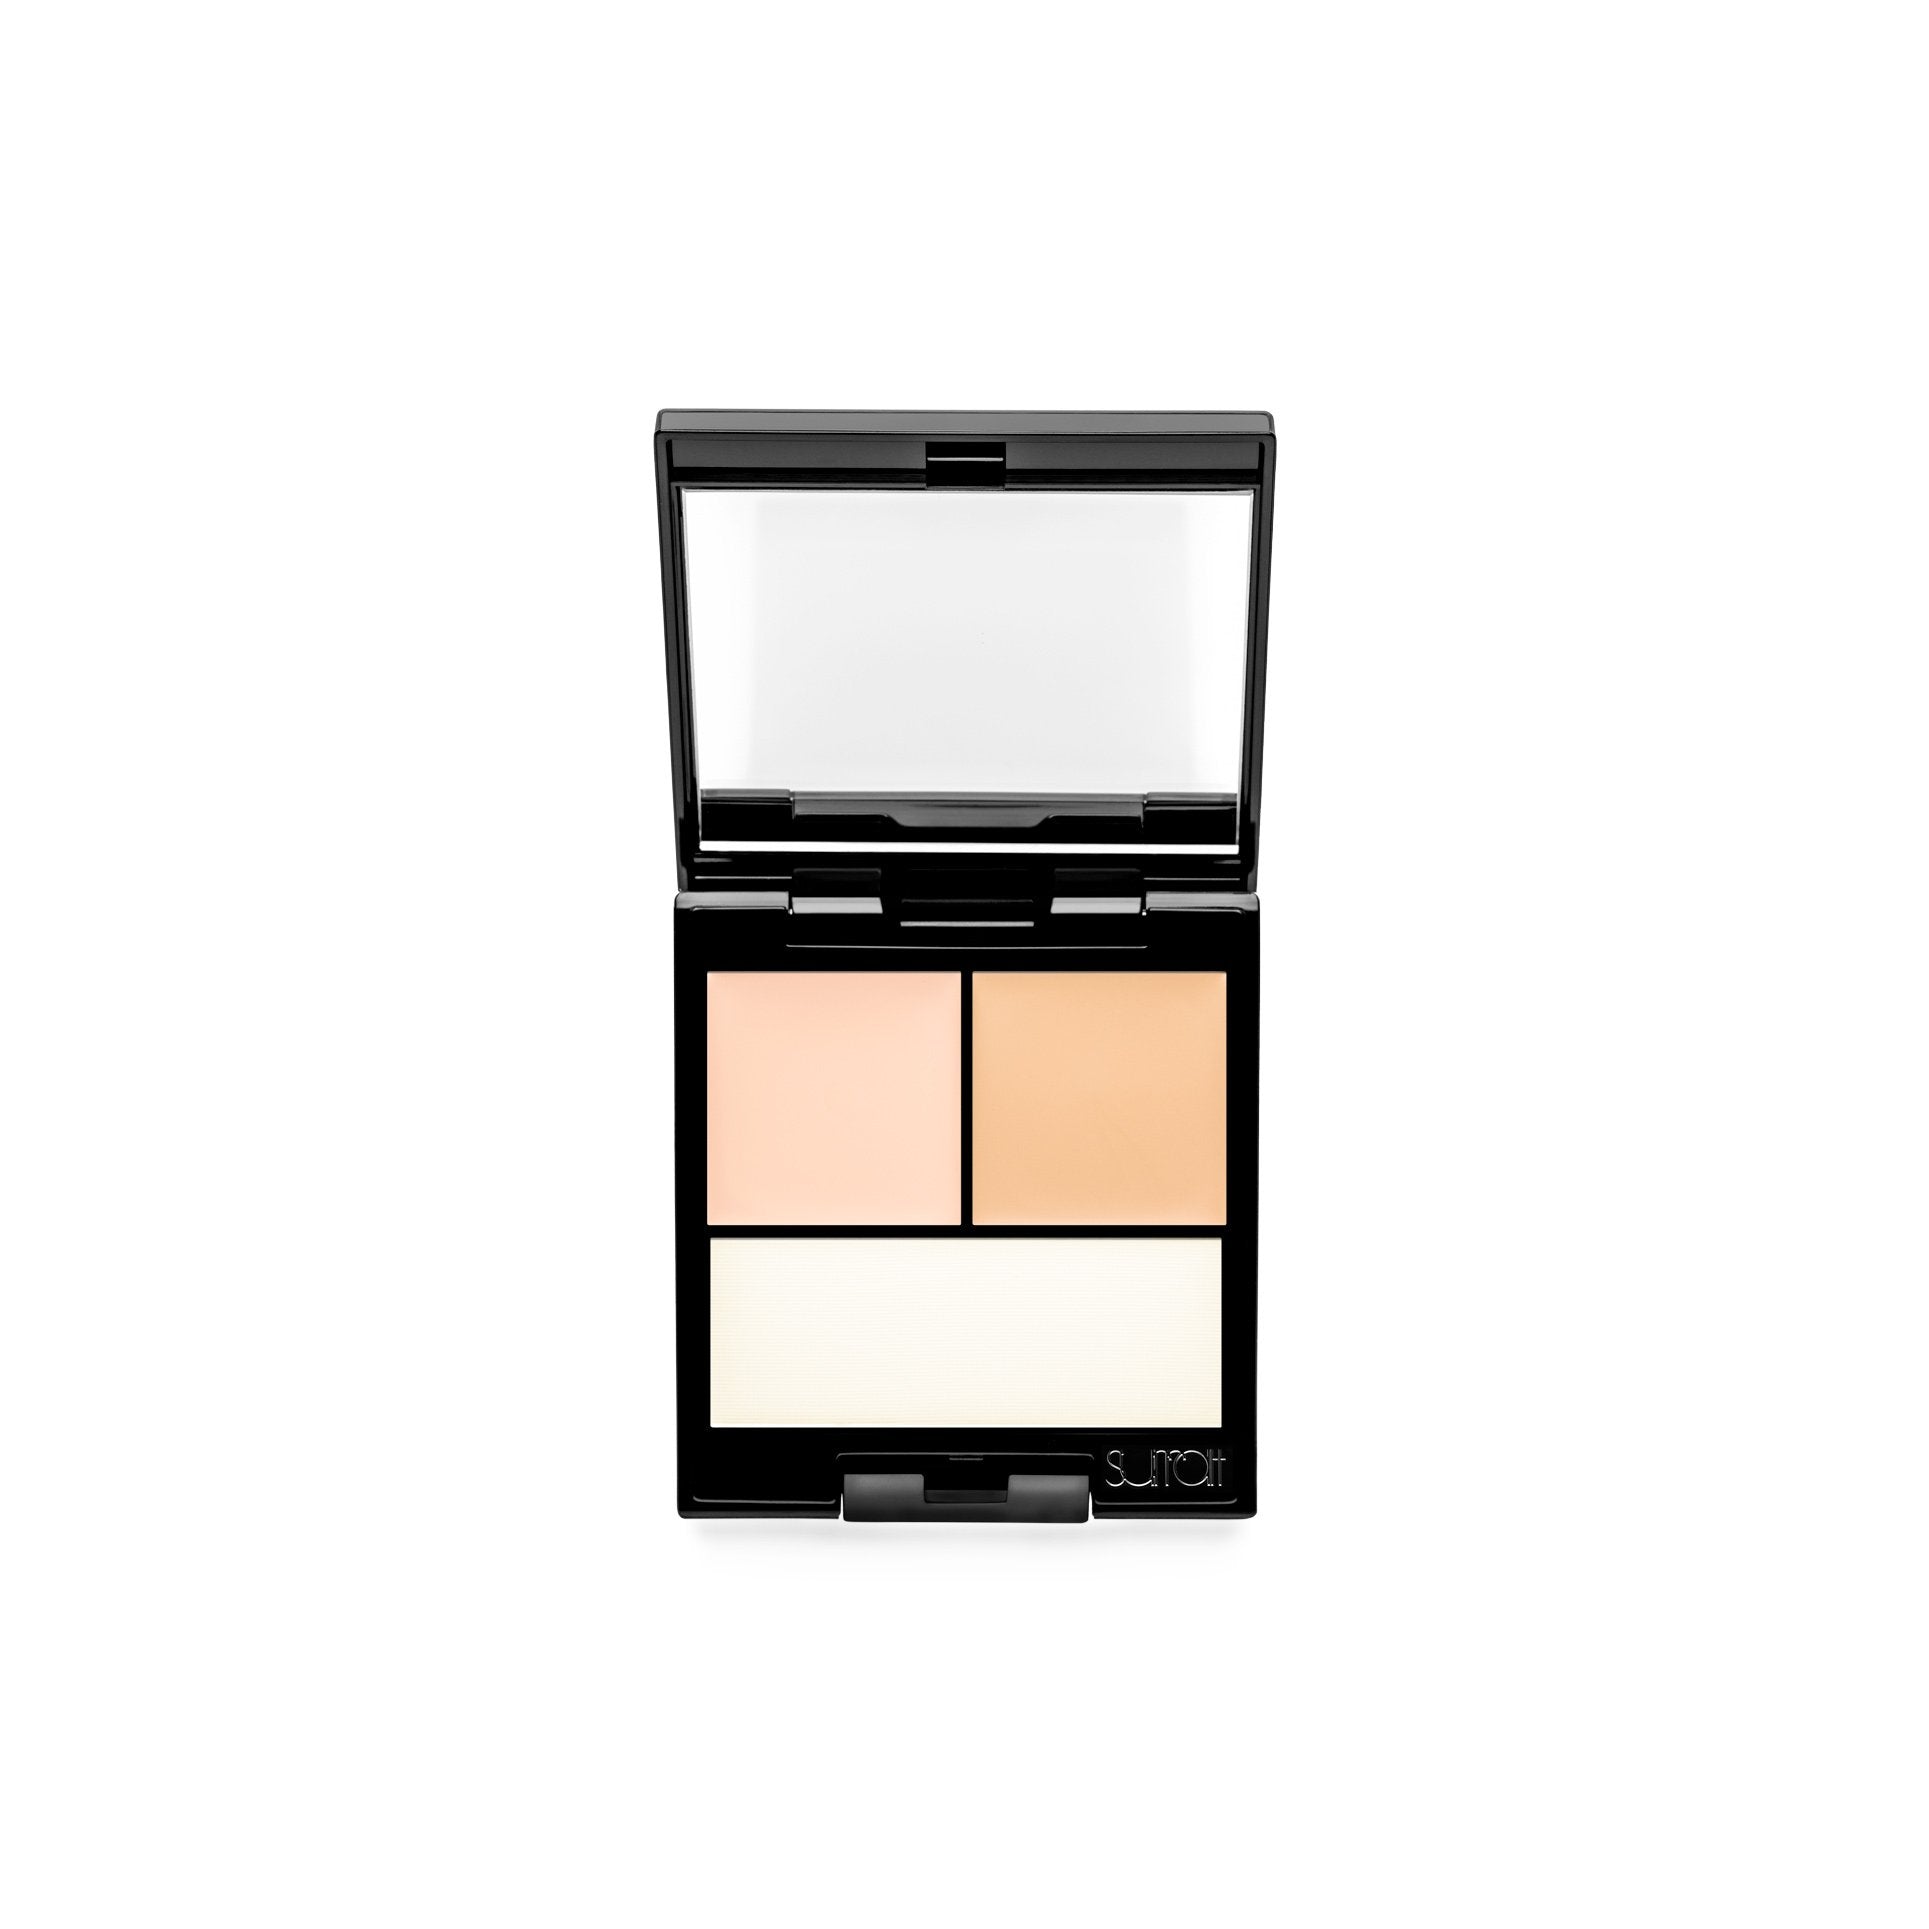 1 - Light Pink / Warm Pink / White Powder - long-wearing tri-color cream concealer palette in light pink and warm pink shades with white setting powder